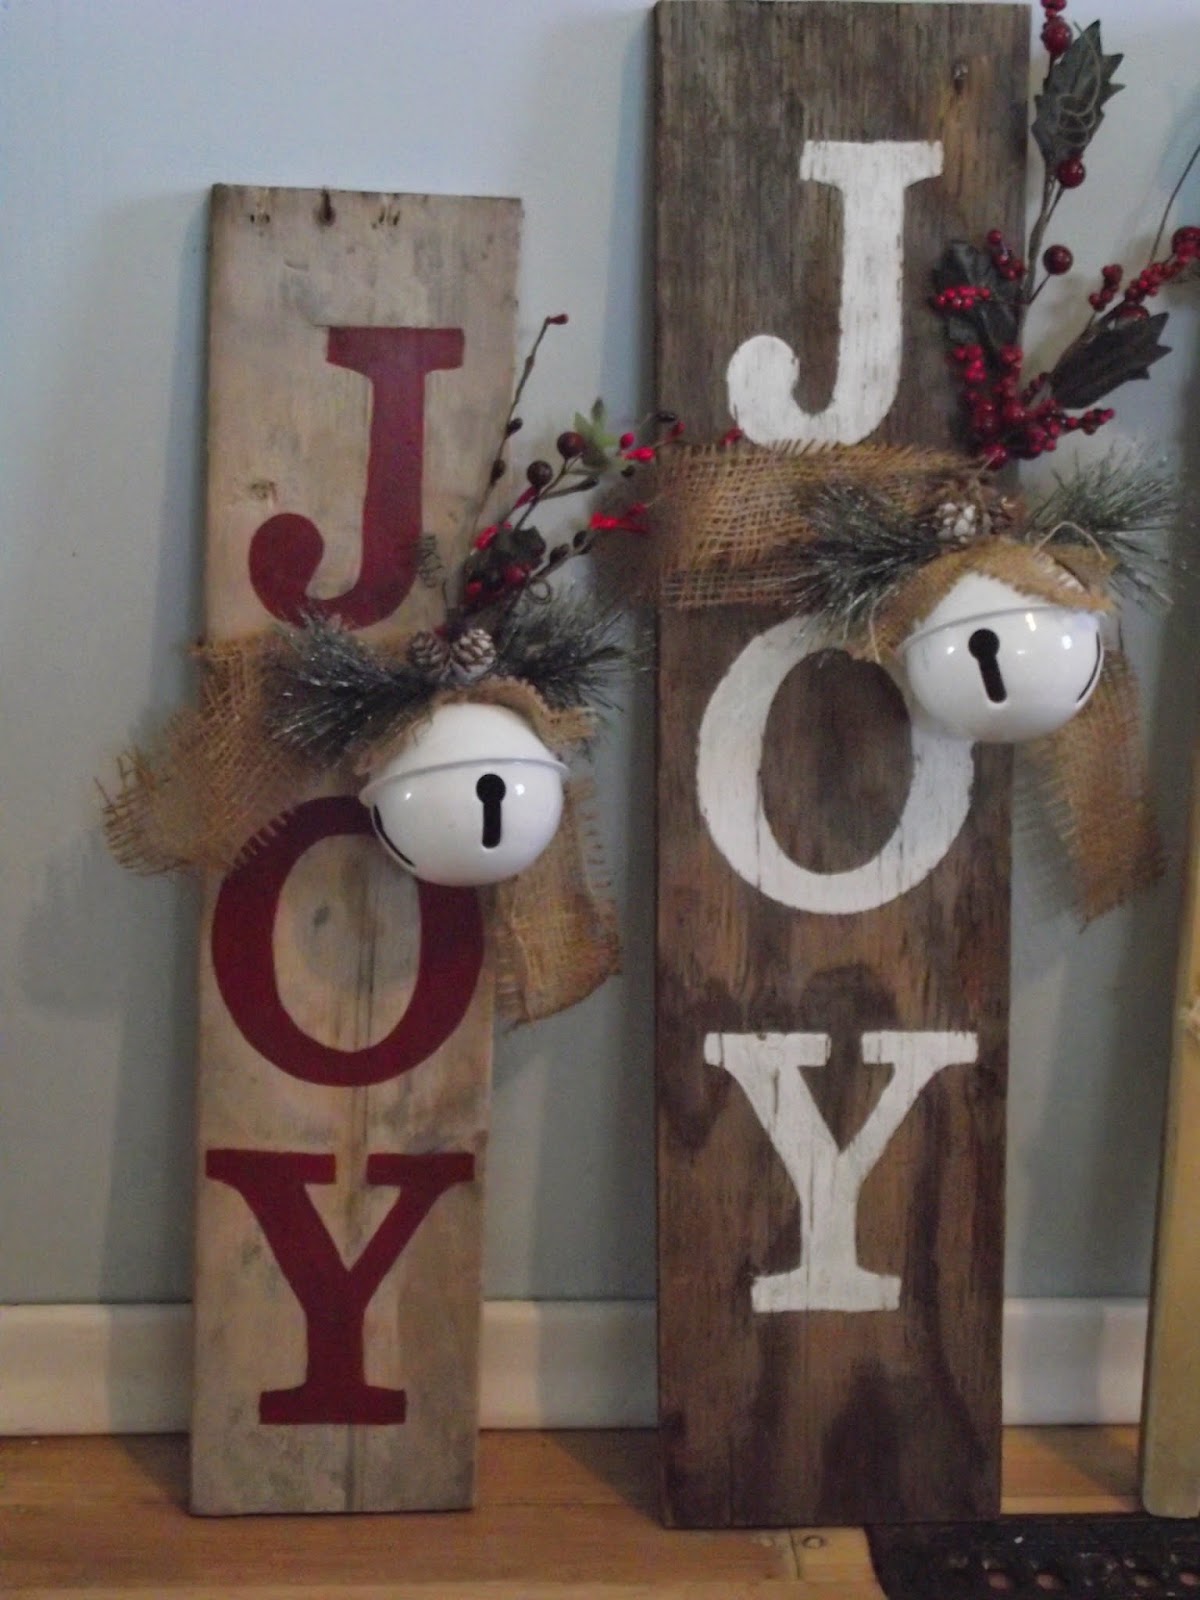 Country Mom at Home: Christmas Crafts - A Sneak Peak